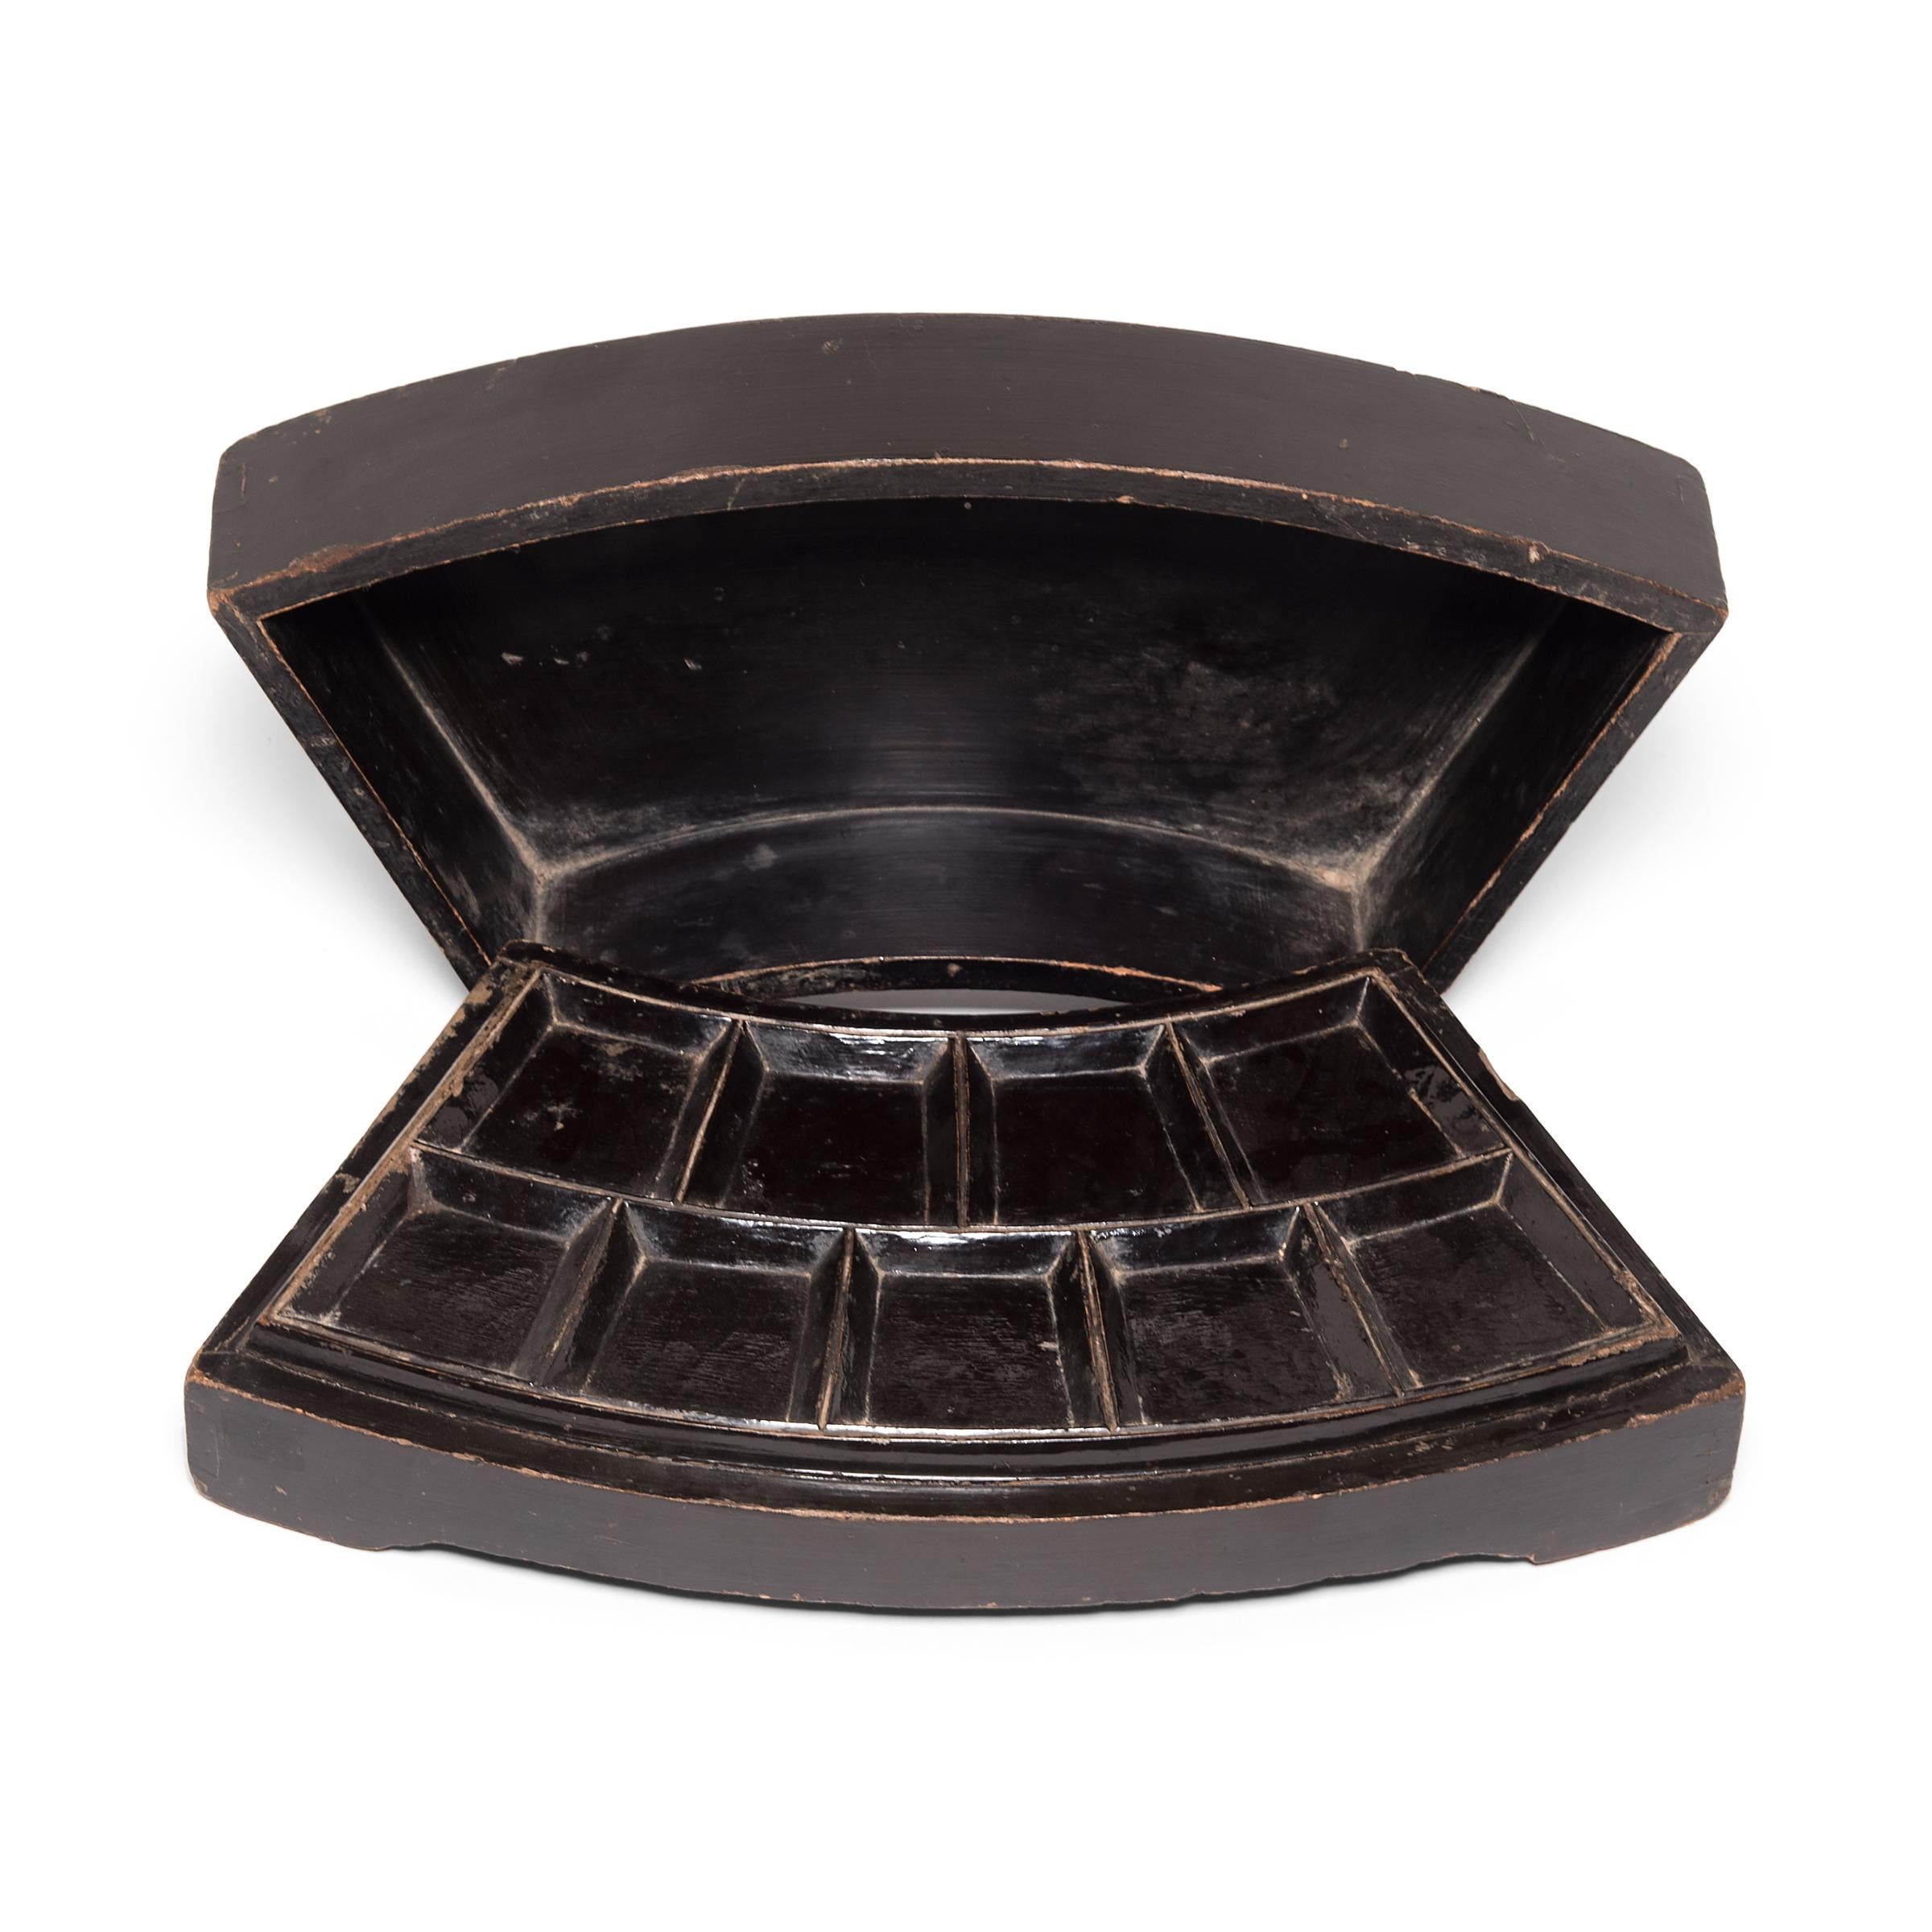 Wood Chinese Fan Shaped Lacquer Snackbox, c. 1850